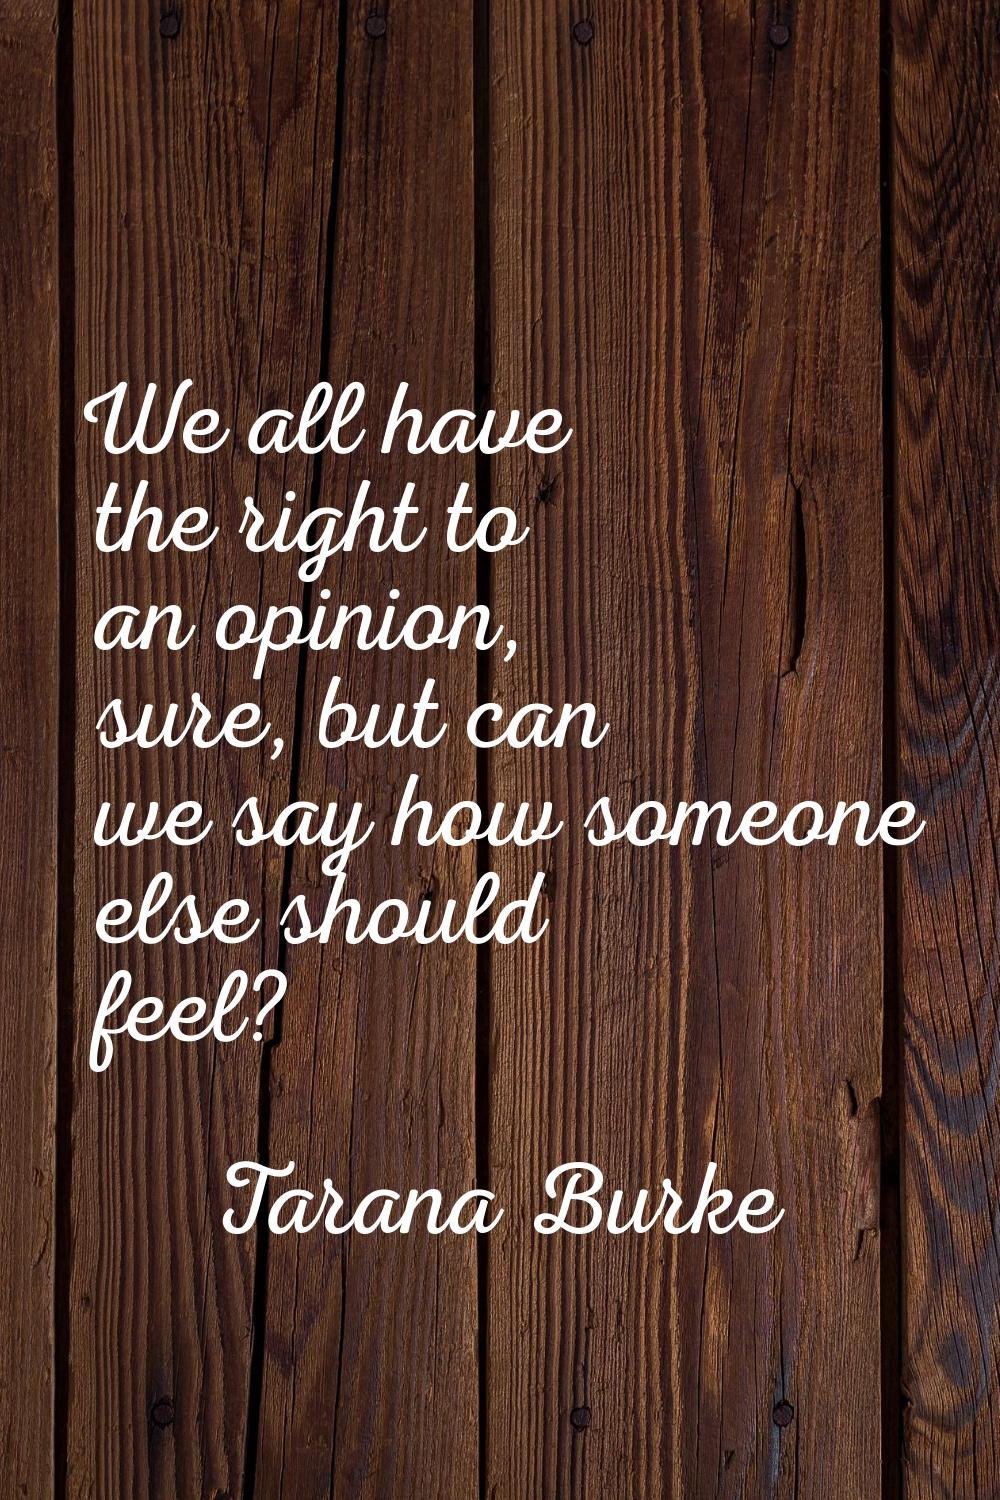 We all have the right to an opinion, sure, but can we say how someone else should feel?